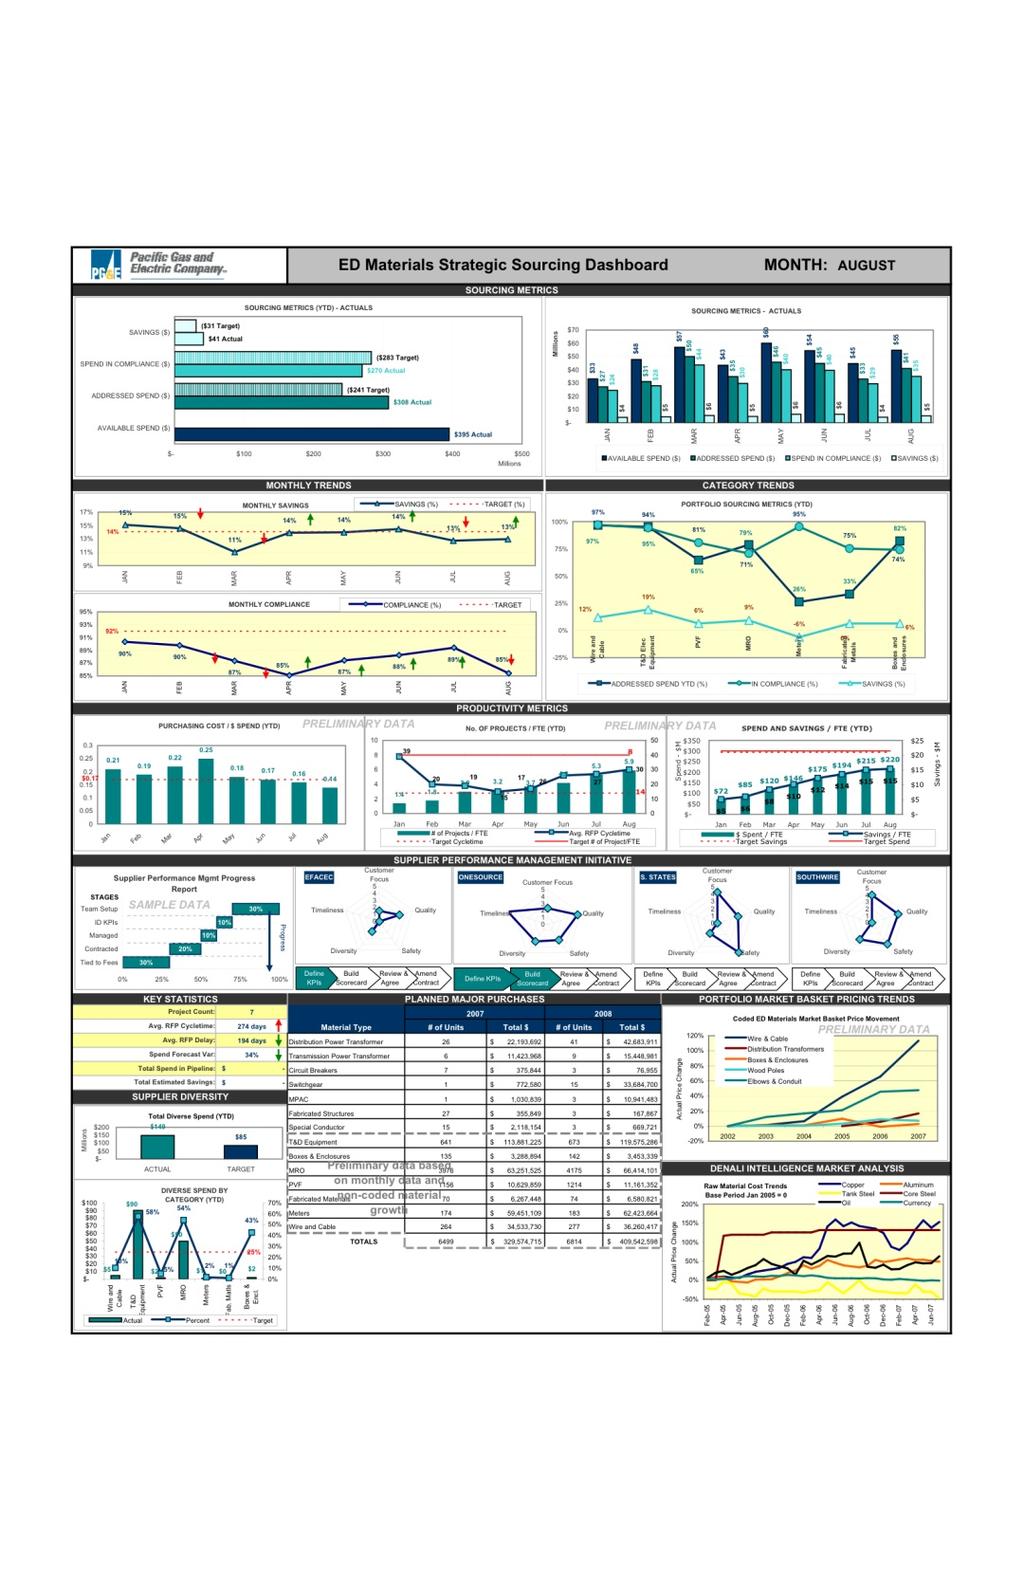 Creating the right metrics Sample Procurement Dashboard Help to ensure linkage of corporate objectives to category-specific savings targets Allow for visibility of key cost, quality and service